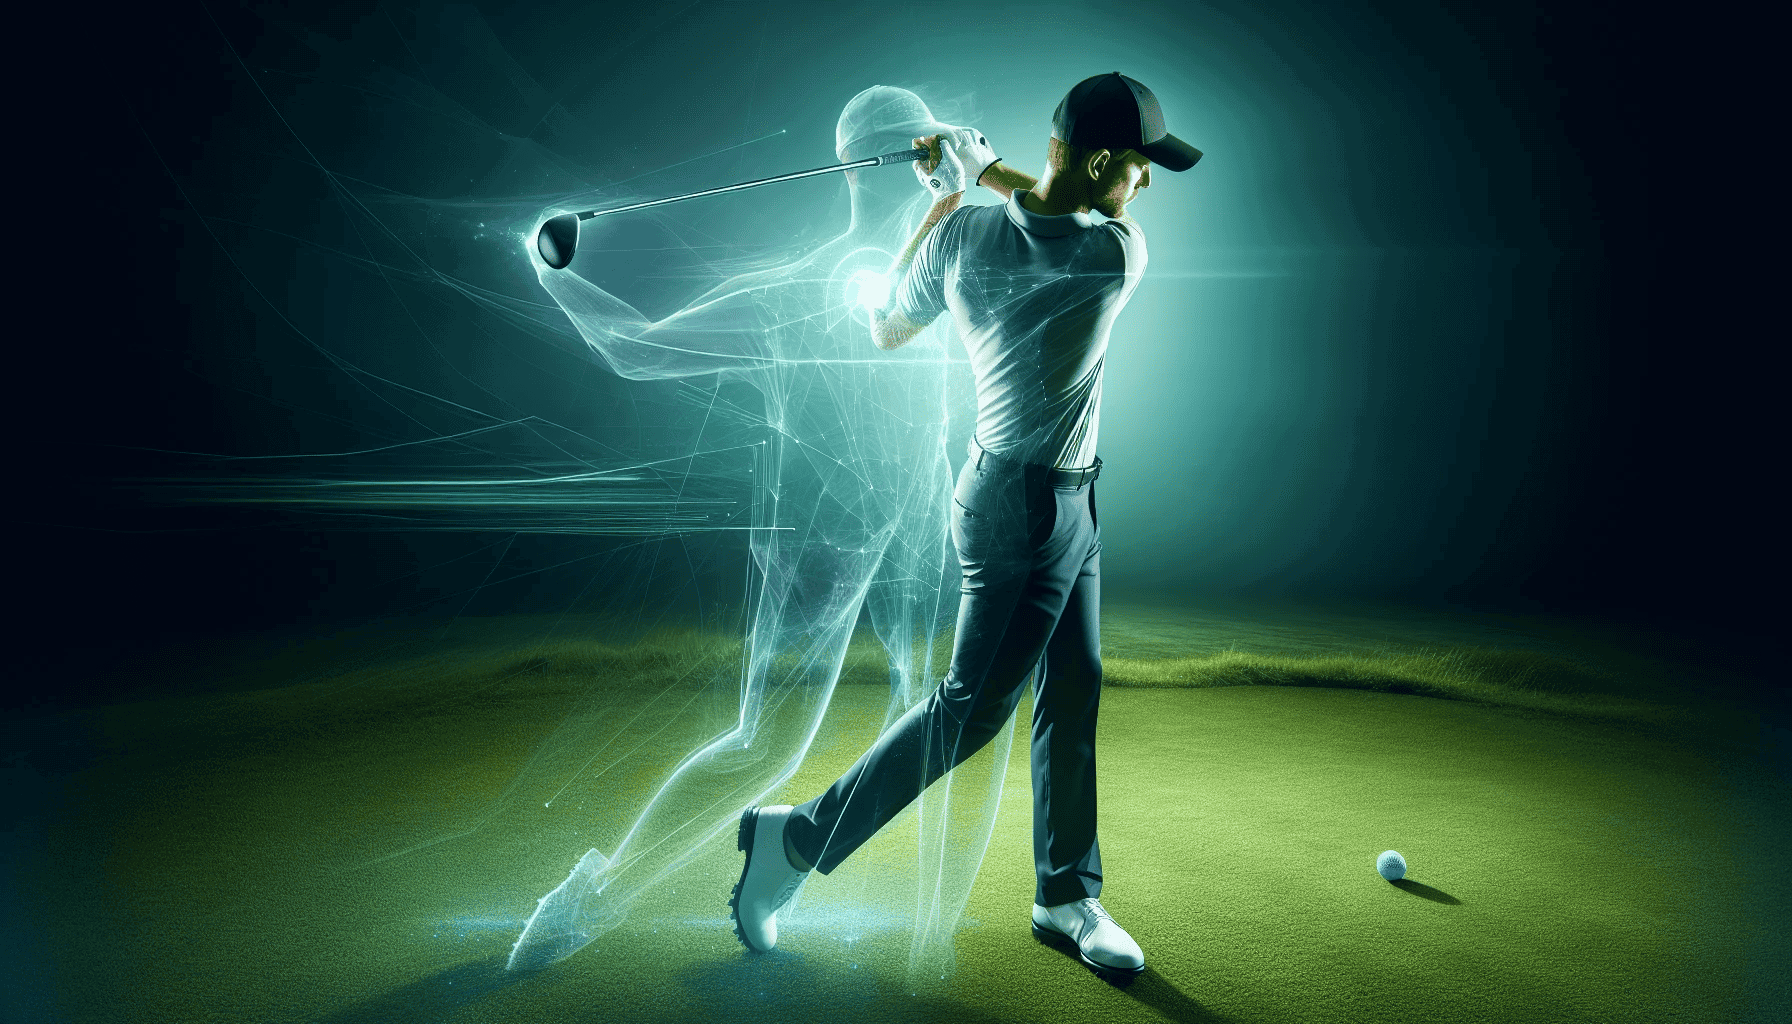 Illustration showing the swing path and club head position